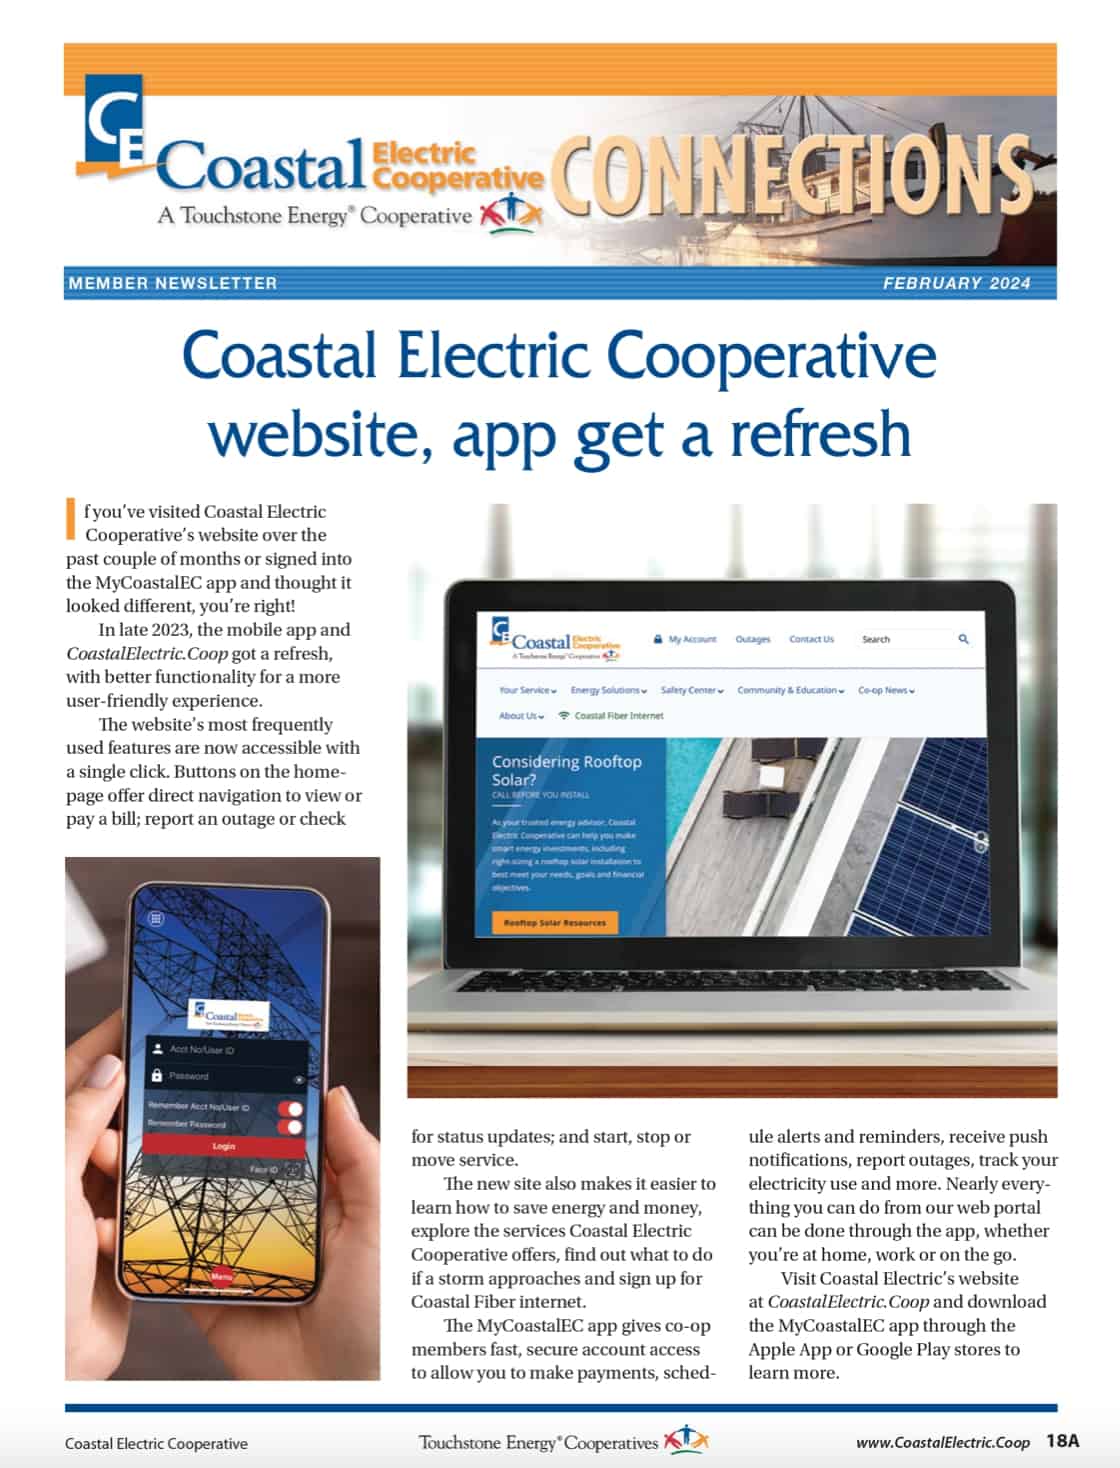 Connections newsletter cover featuring the website redesign, February 2024